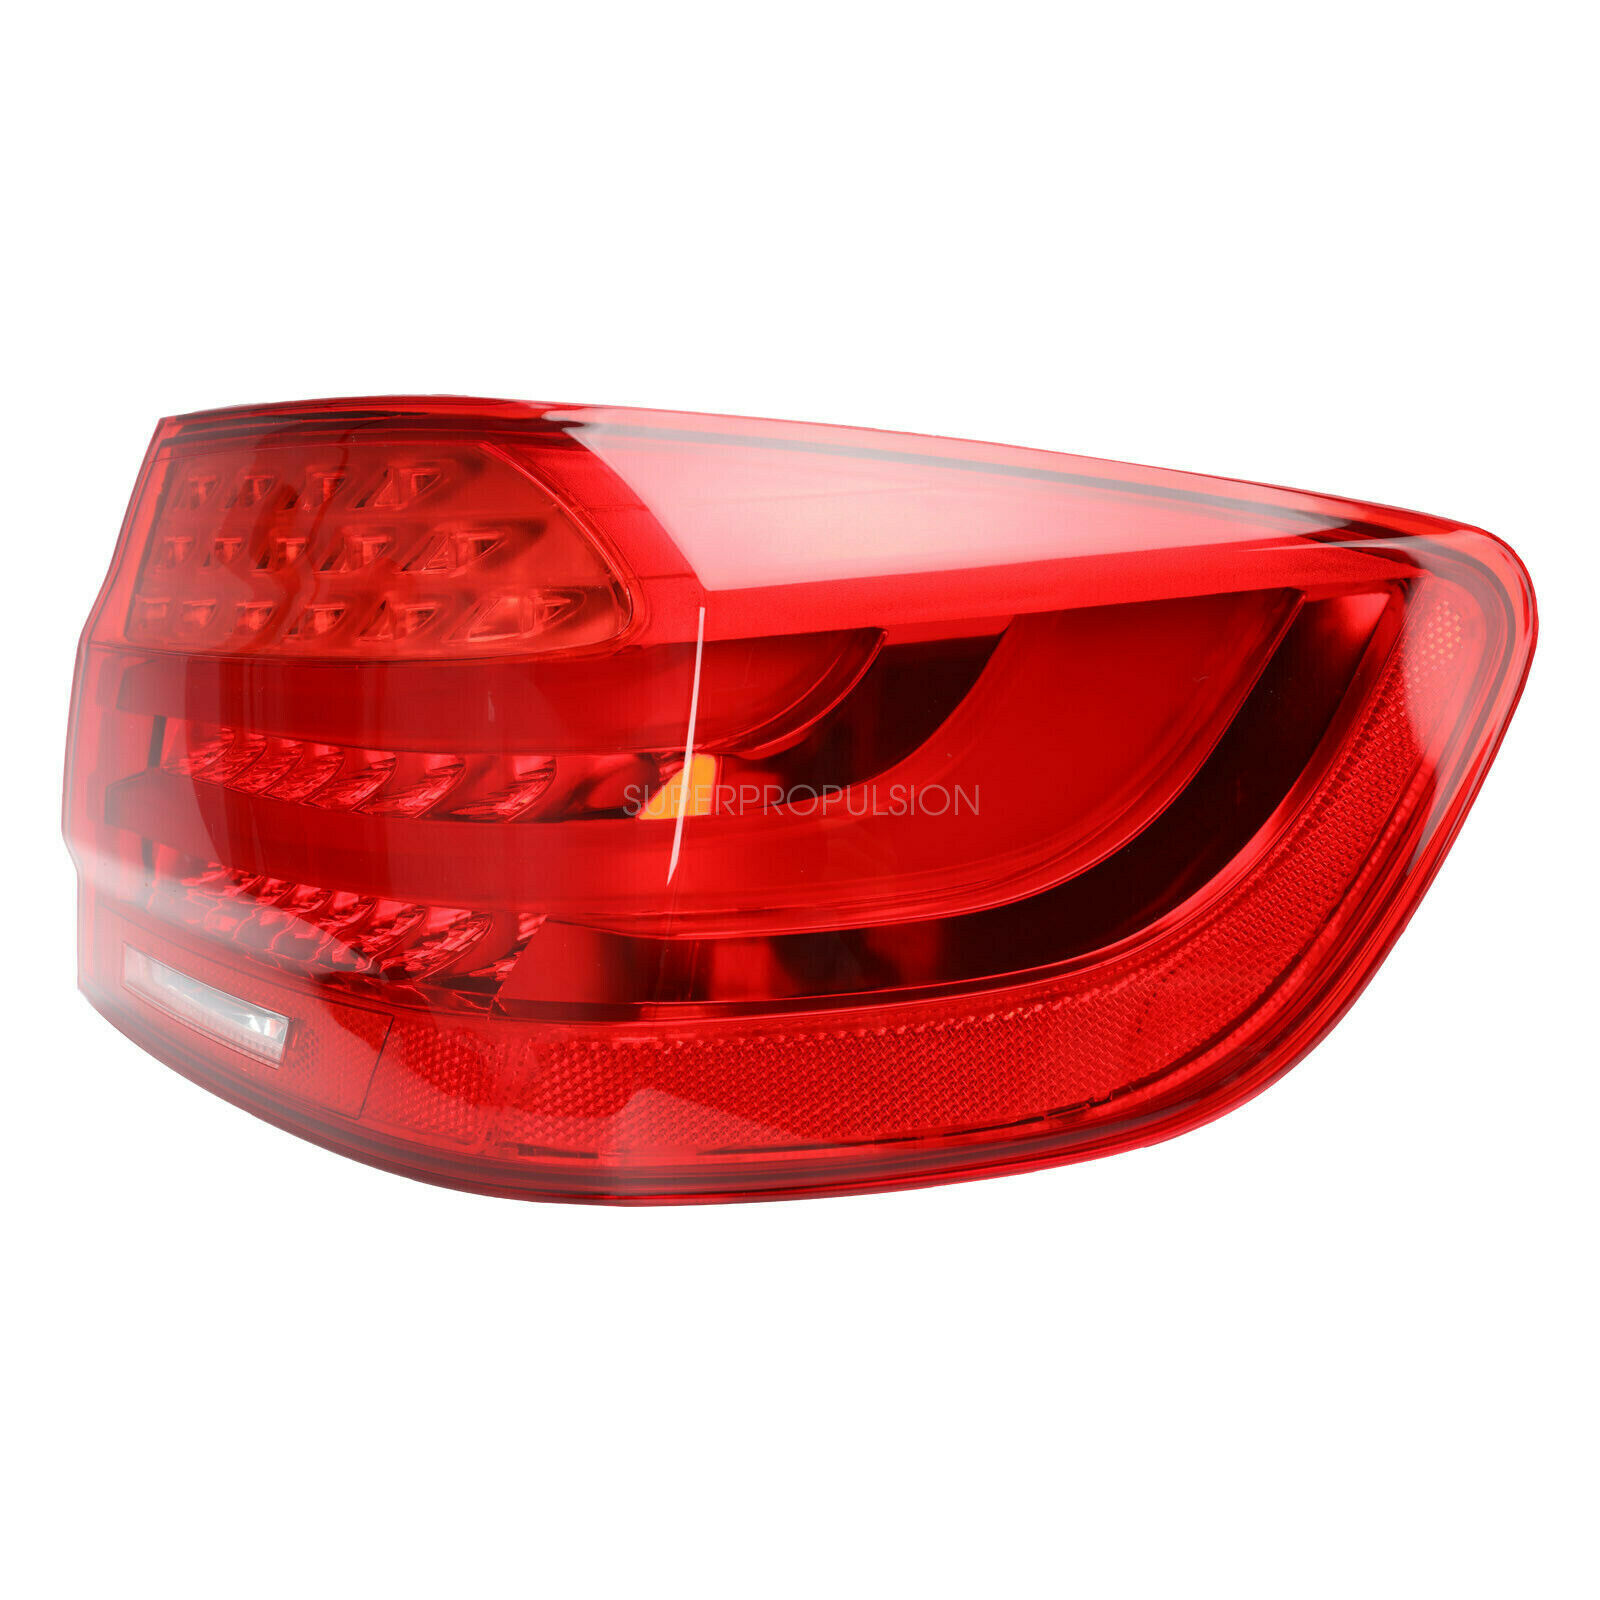 NEW GENUINE BMW E92 LCI 3 SERIES REAR LED O/S RIGHT OUTER TAIL LIGHT 7251958